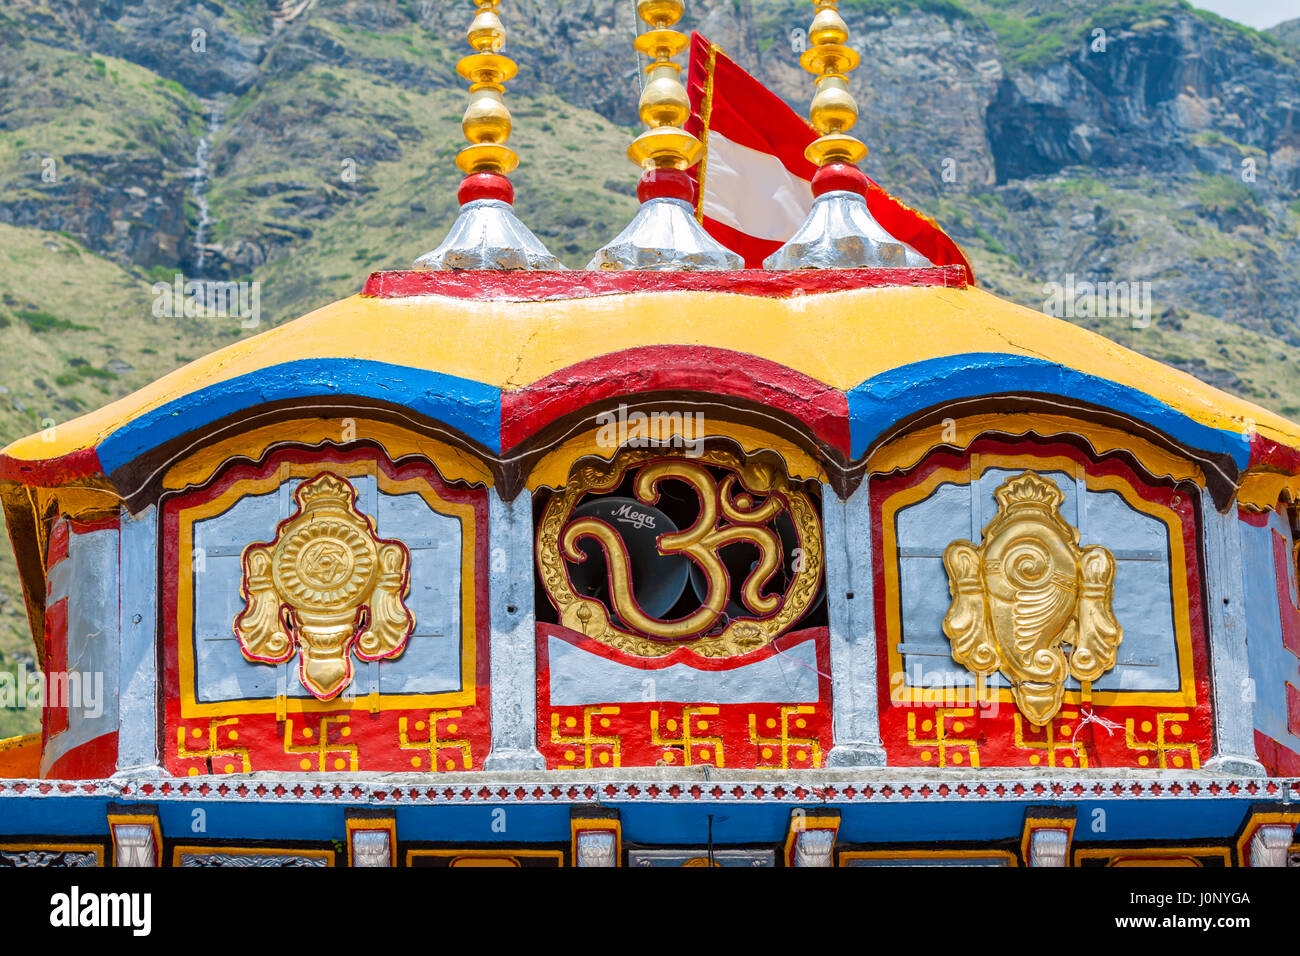 The dome above the Badrinath Temple in Uttarkhand, North India, displaying the symbol om and the emblems of the Hindu God Vishnu. Stock Photo